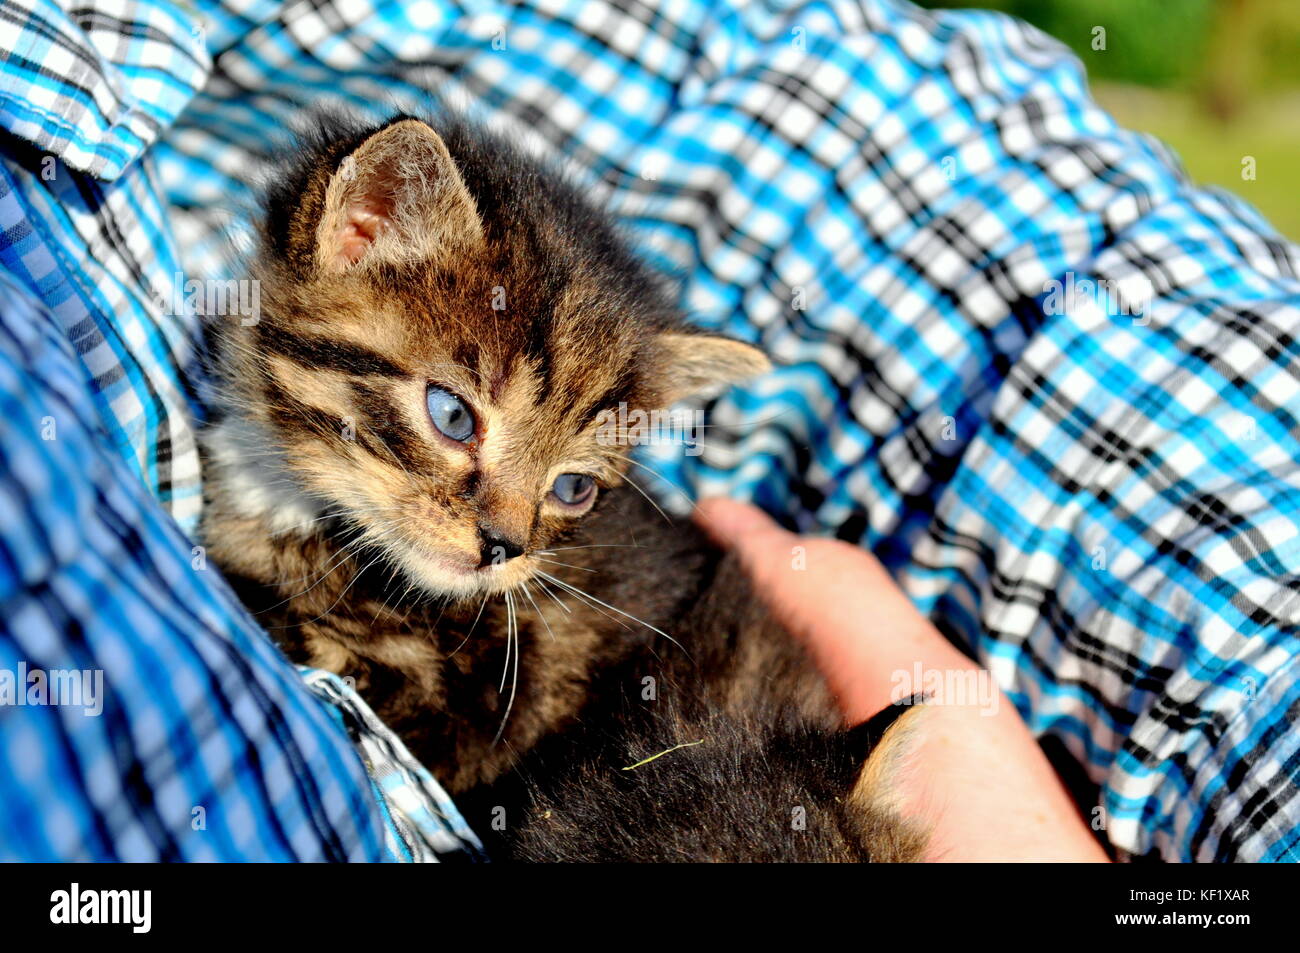 Kitty cat with blue eyes in arms of a man, looking in the distance. Stock Photo